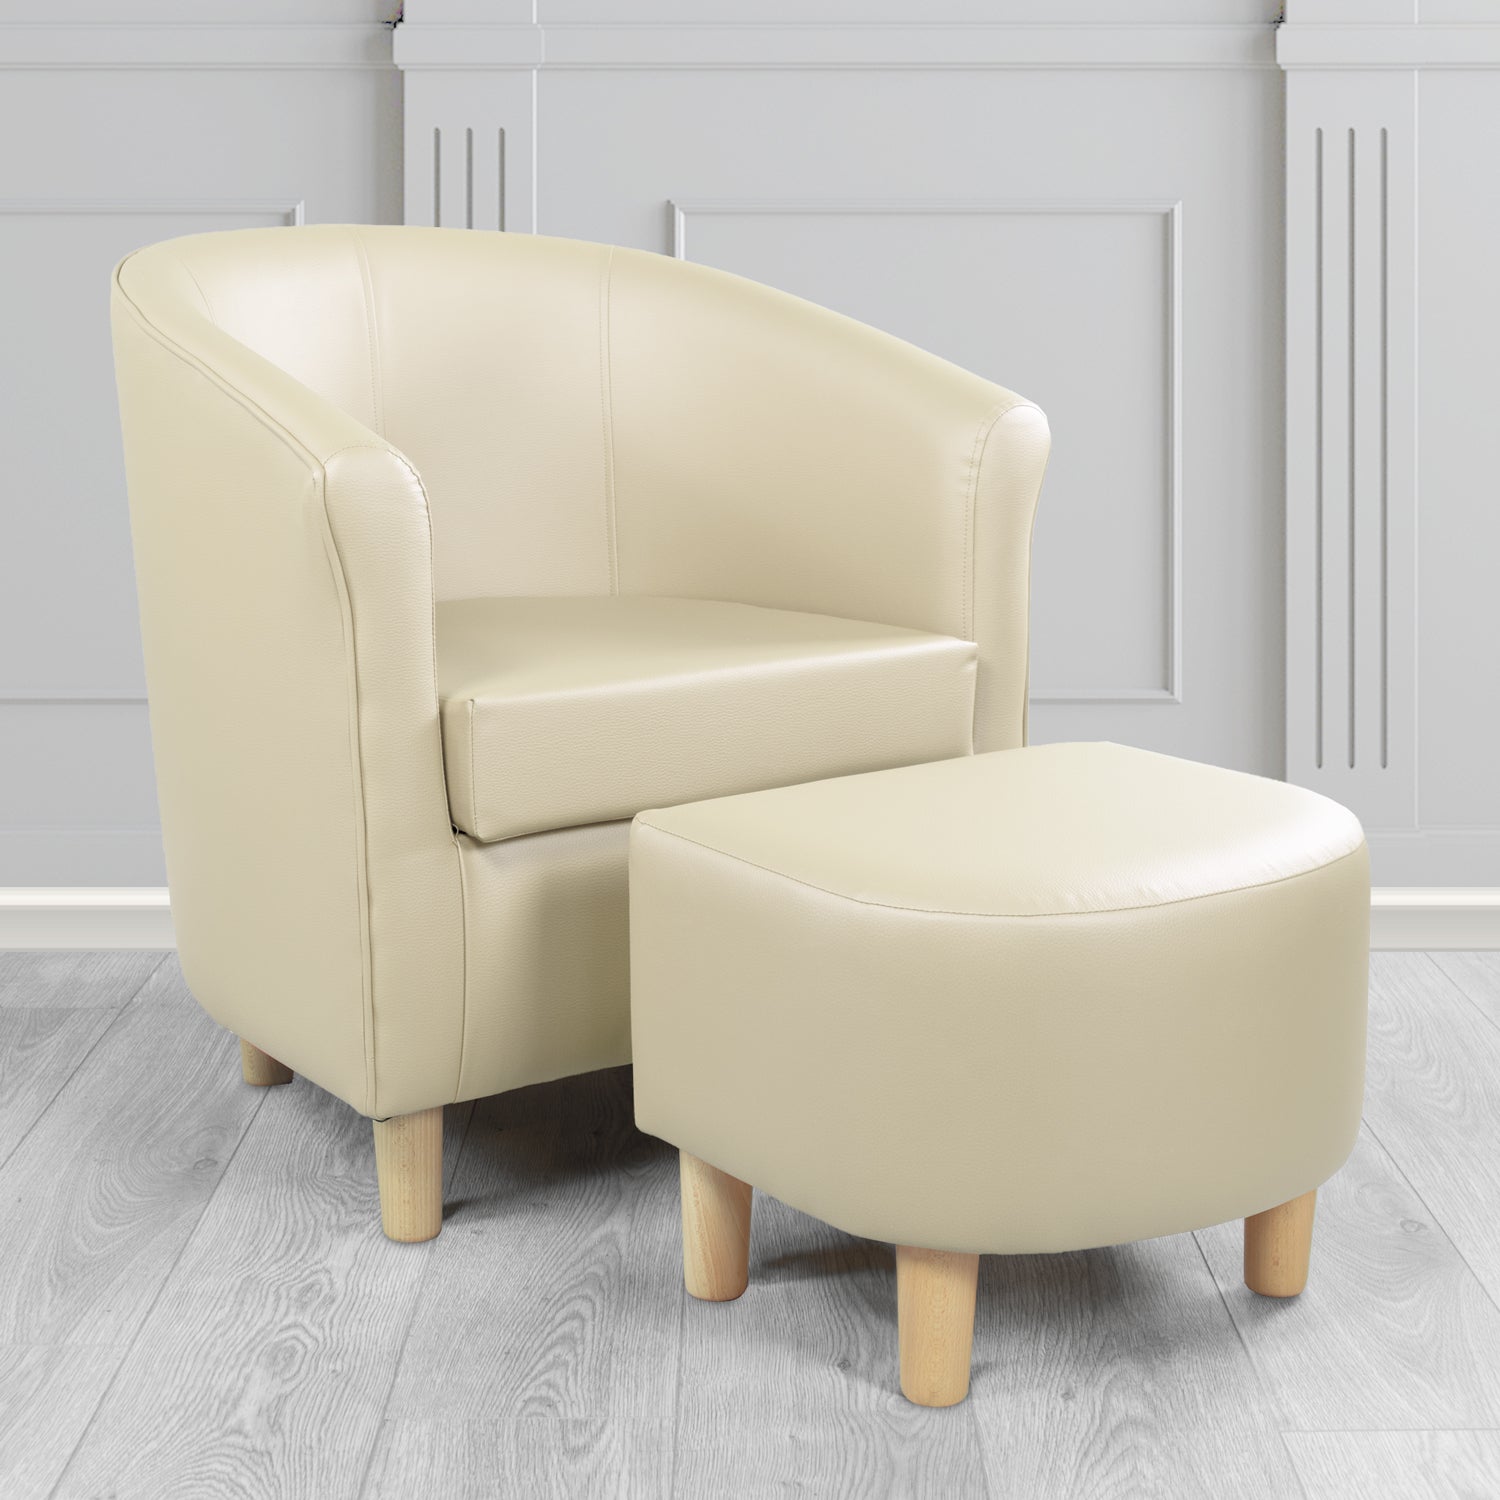 Tuscany Tub Chair with Footstool Set in Madrid Cream Faux Leather - The Tub Chair Shop